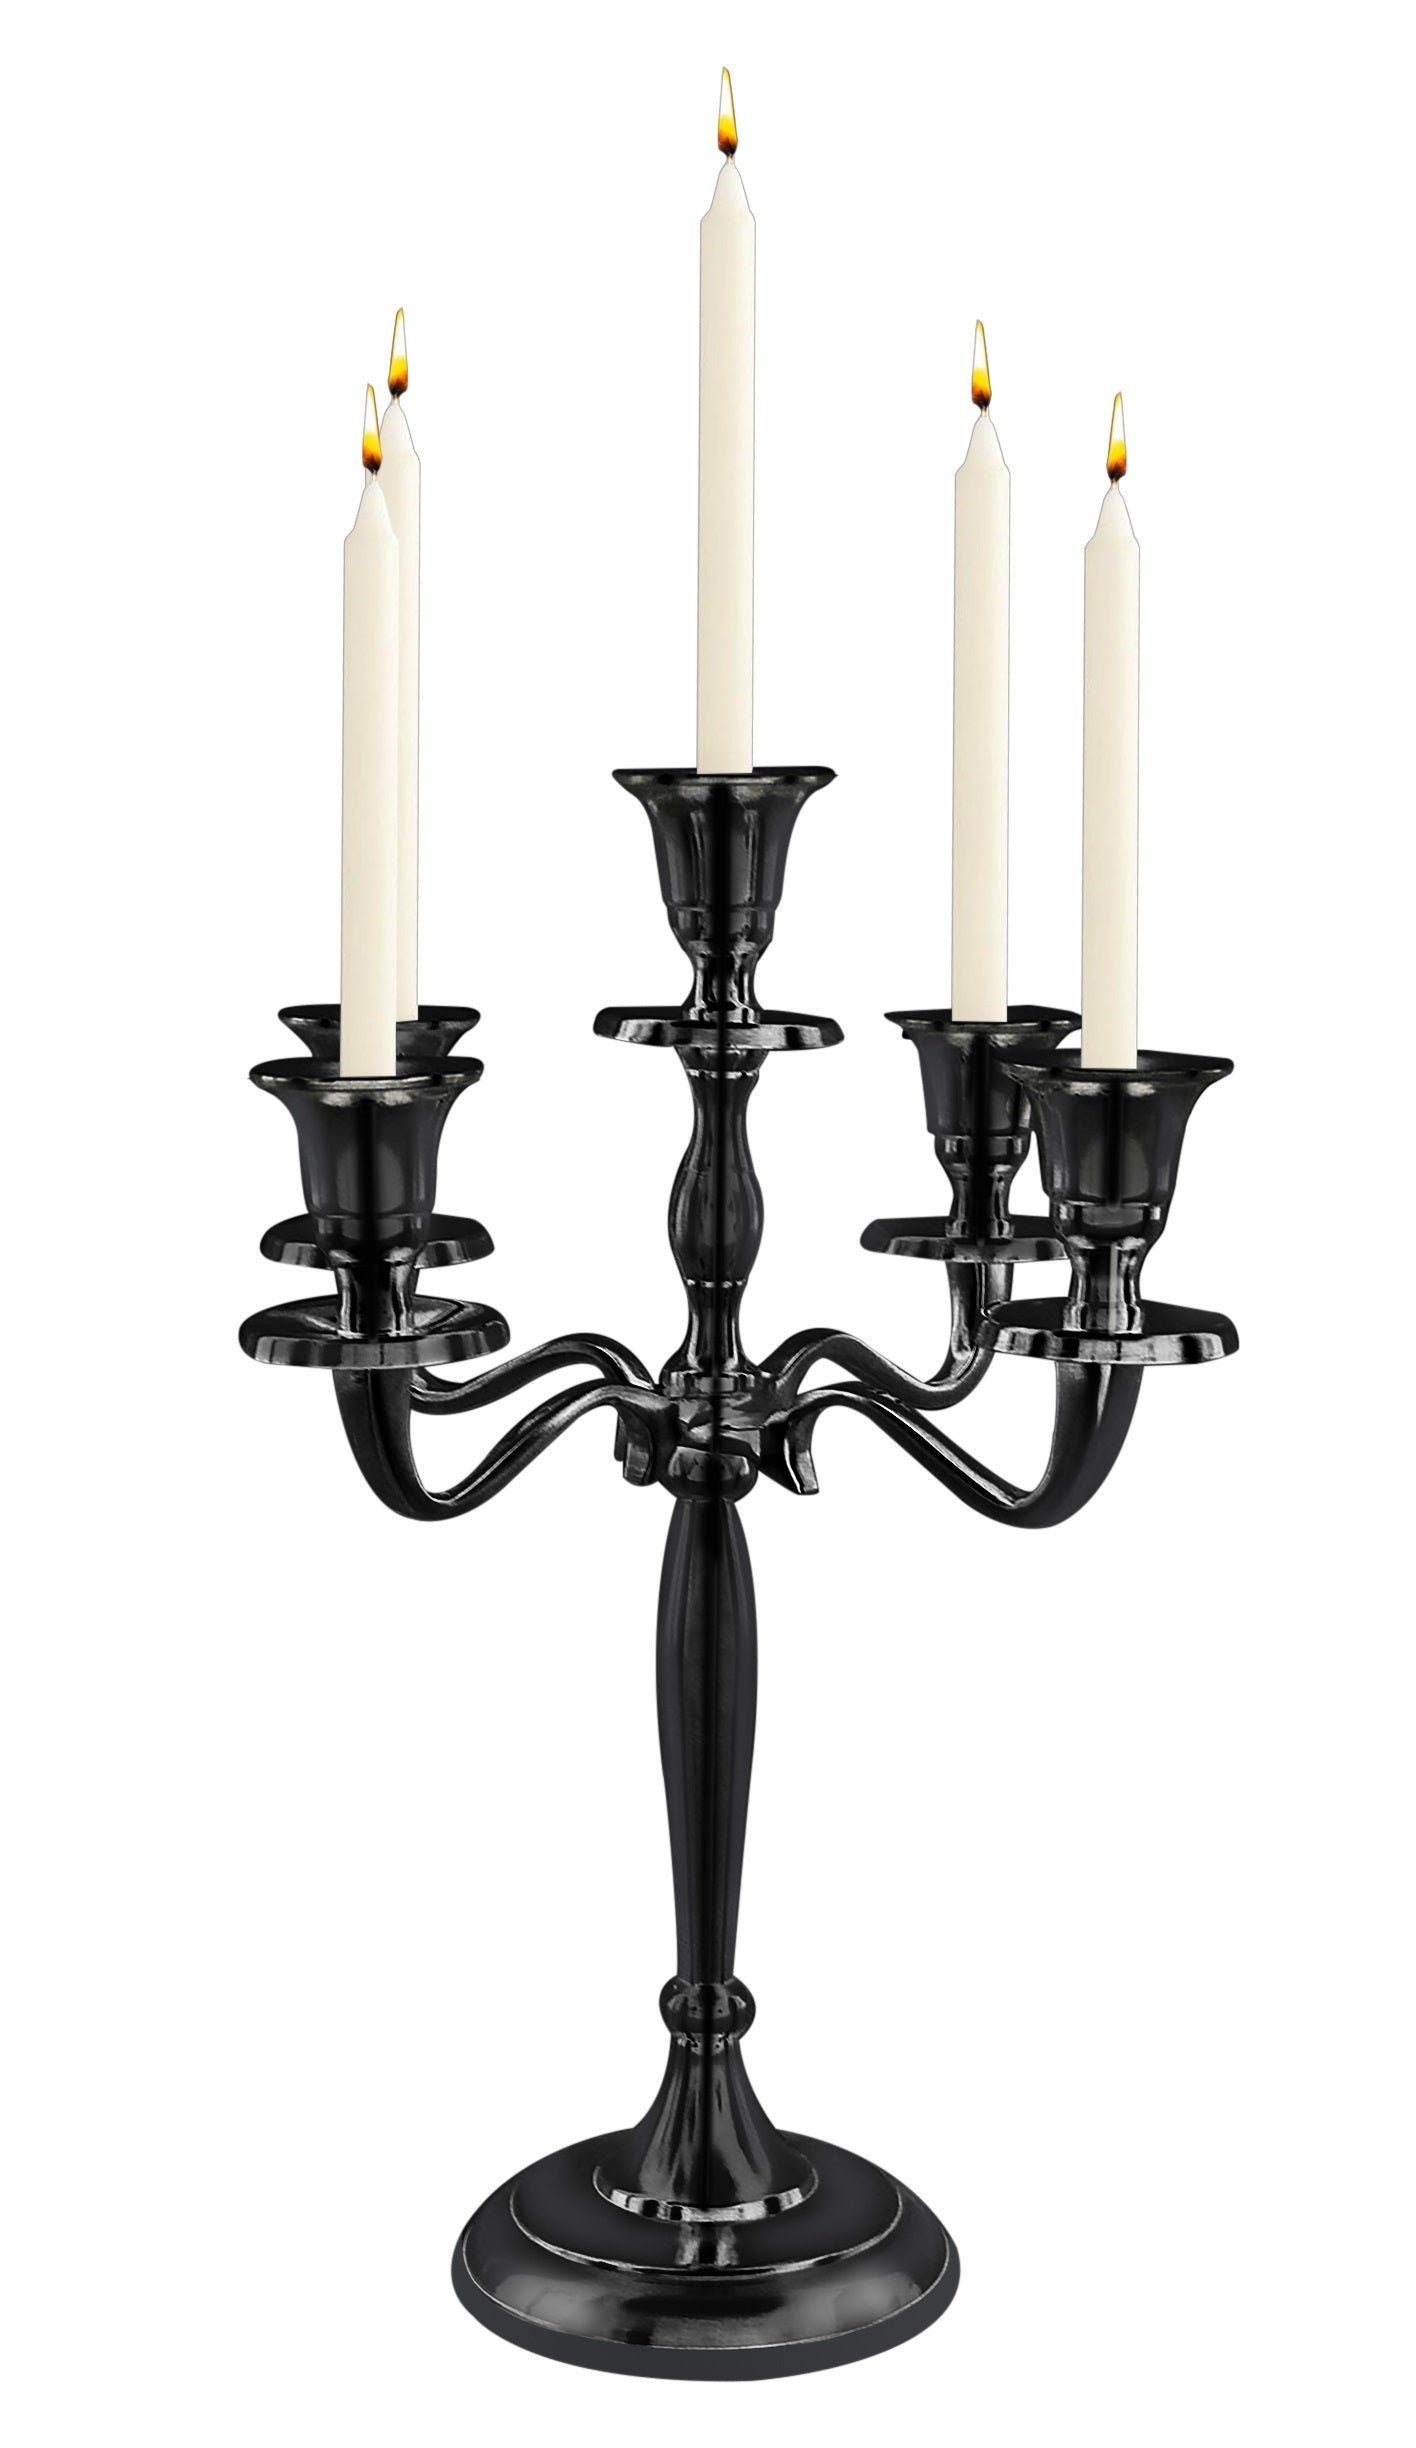 12" Inch Tall 5 Arm Candlestick Candelabra Candle Holder | Black & Silver Finishes